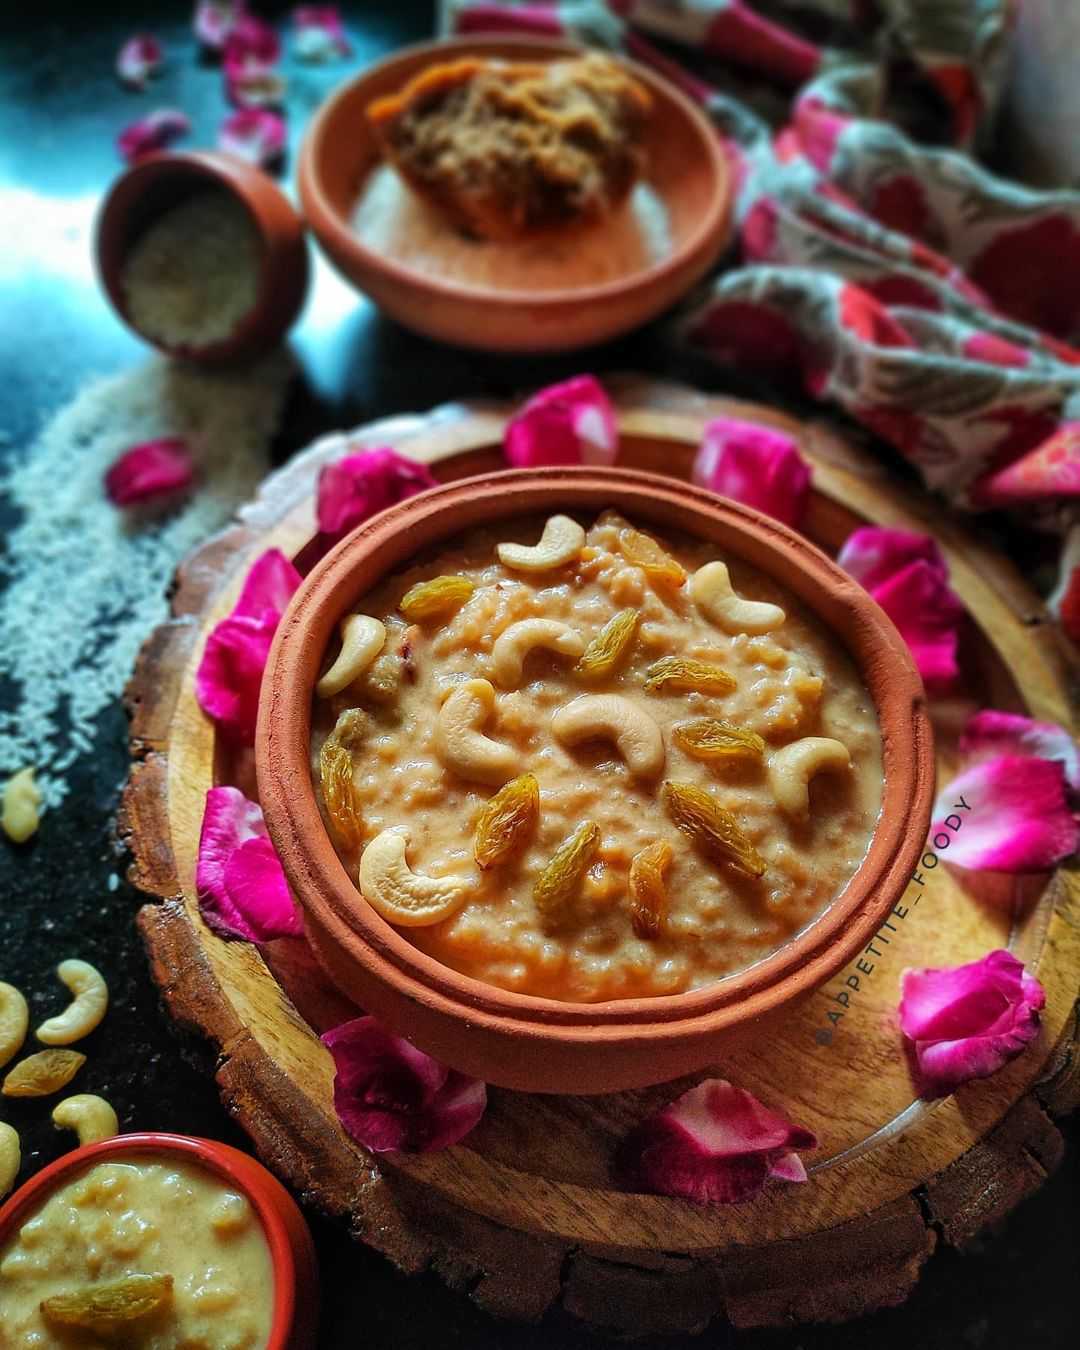 Nolen gur halwa which is a kind of pudding made with milk and jaggery